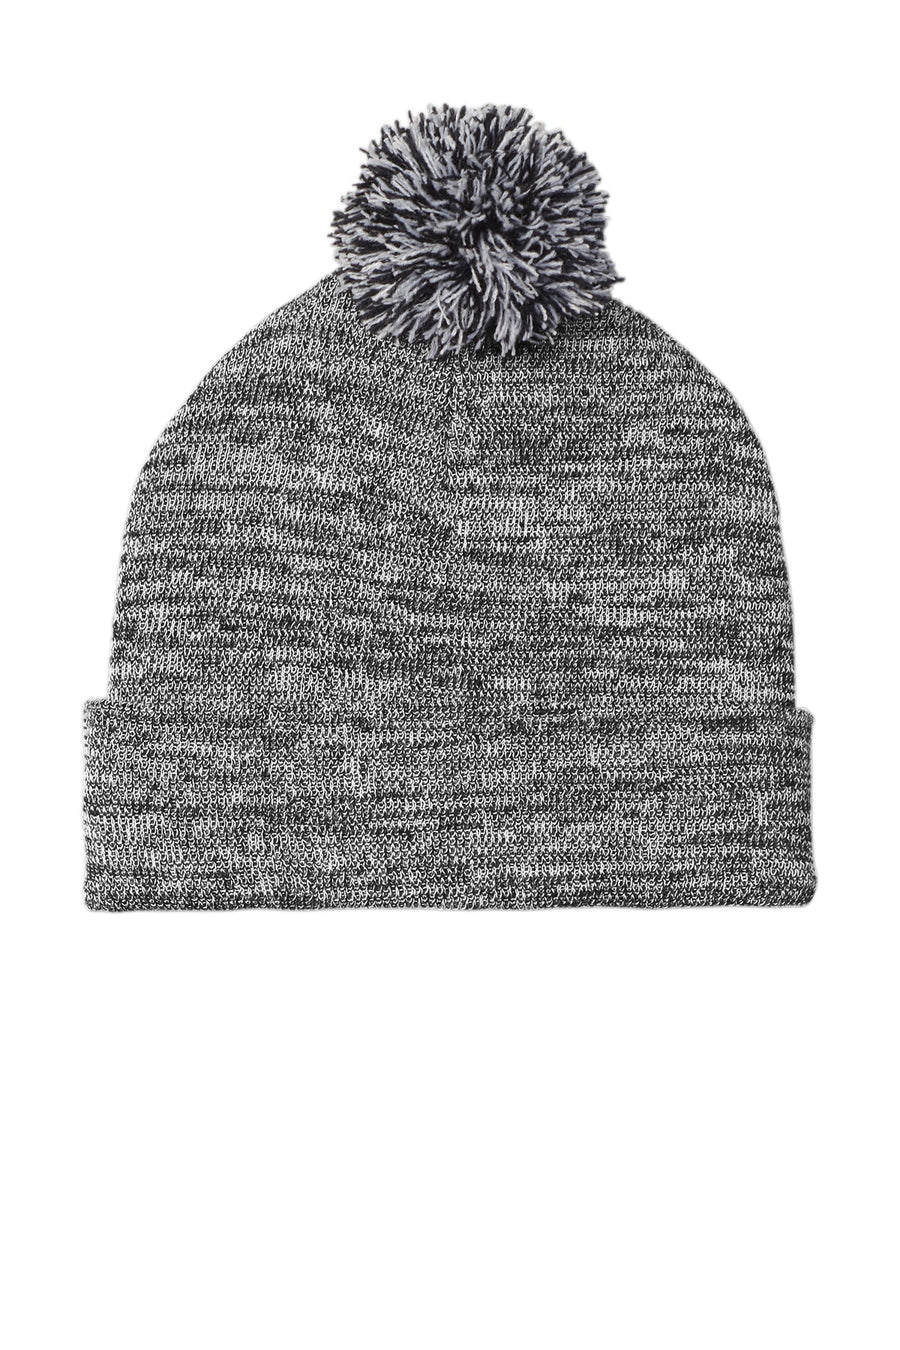 STC41-Grey Heather-front_model